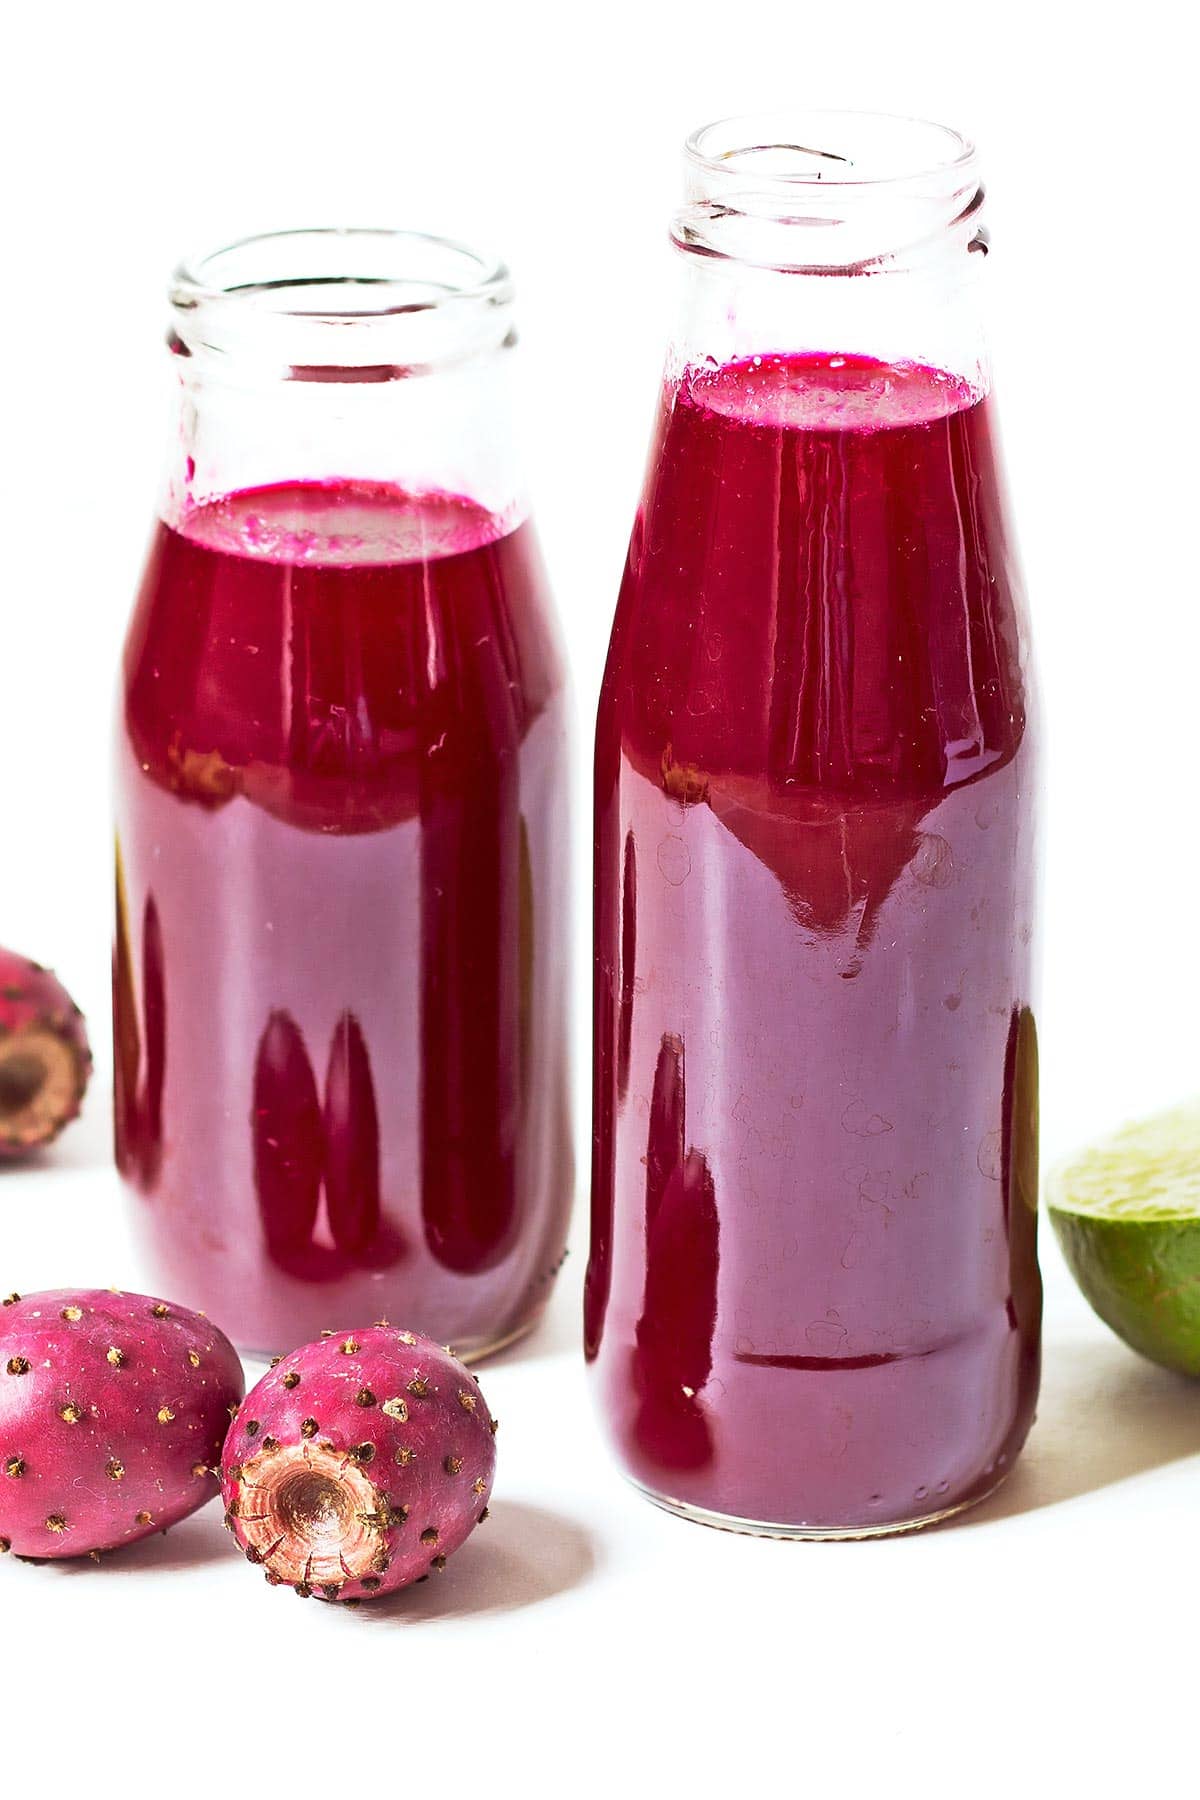 Small bottles of prickly pear syrup